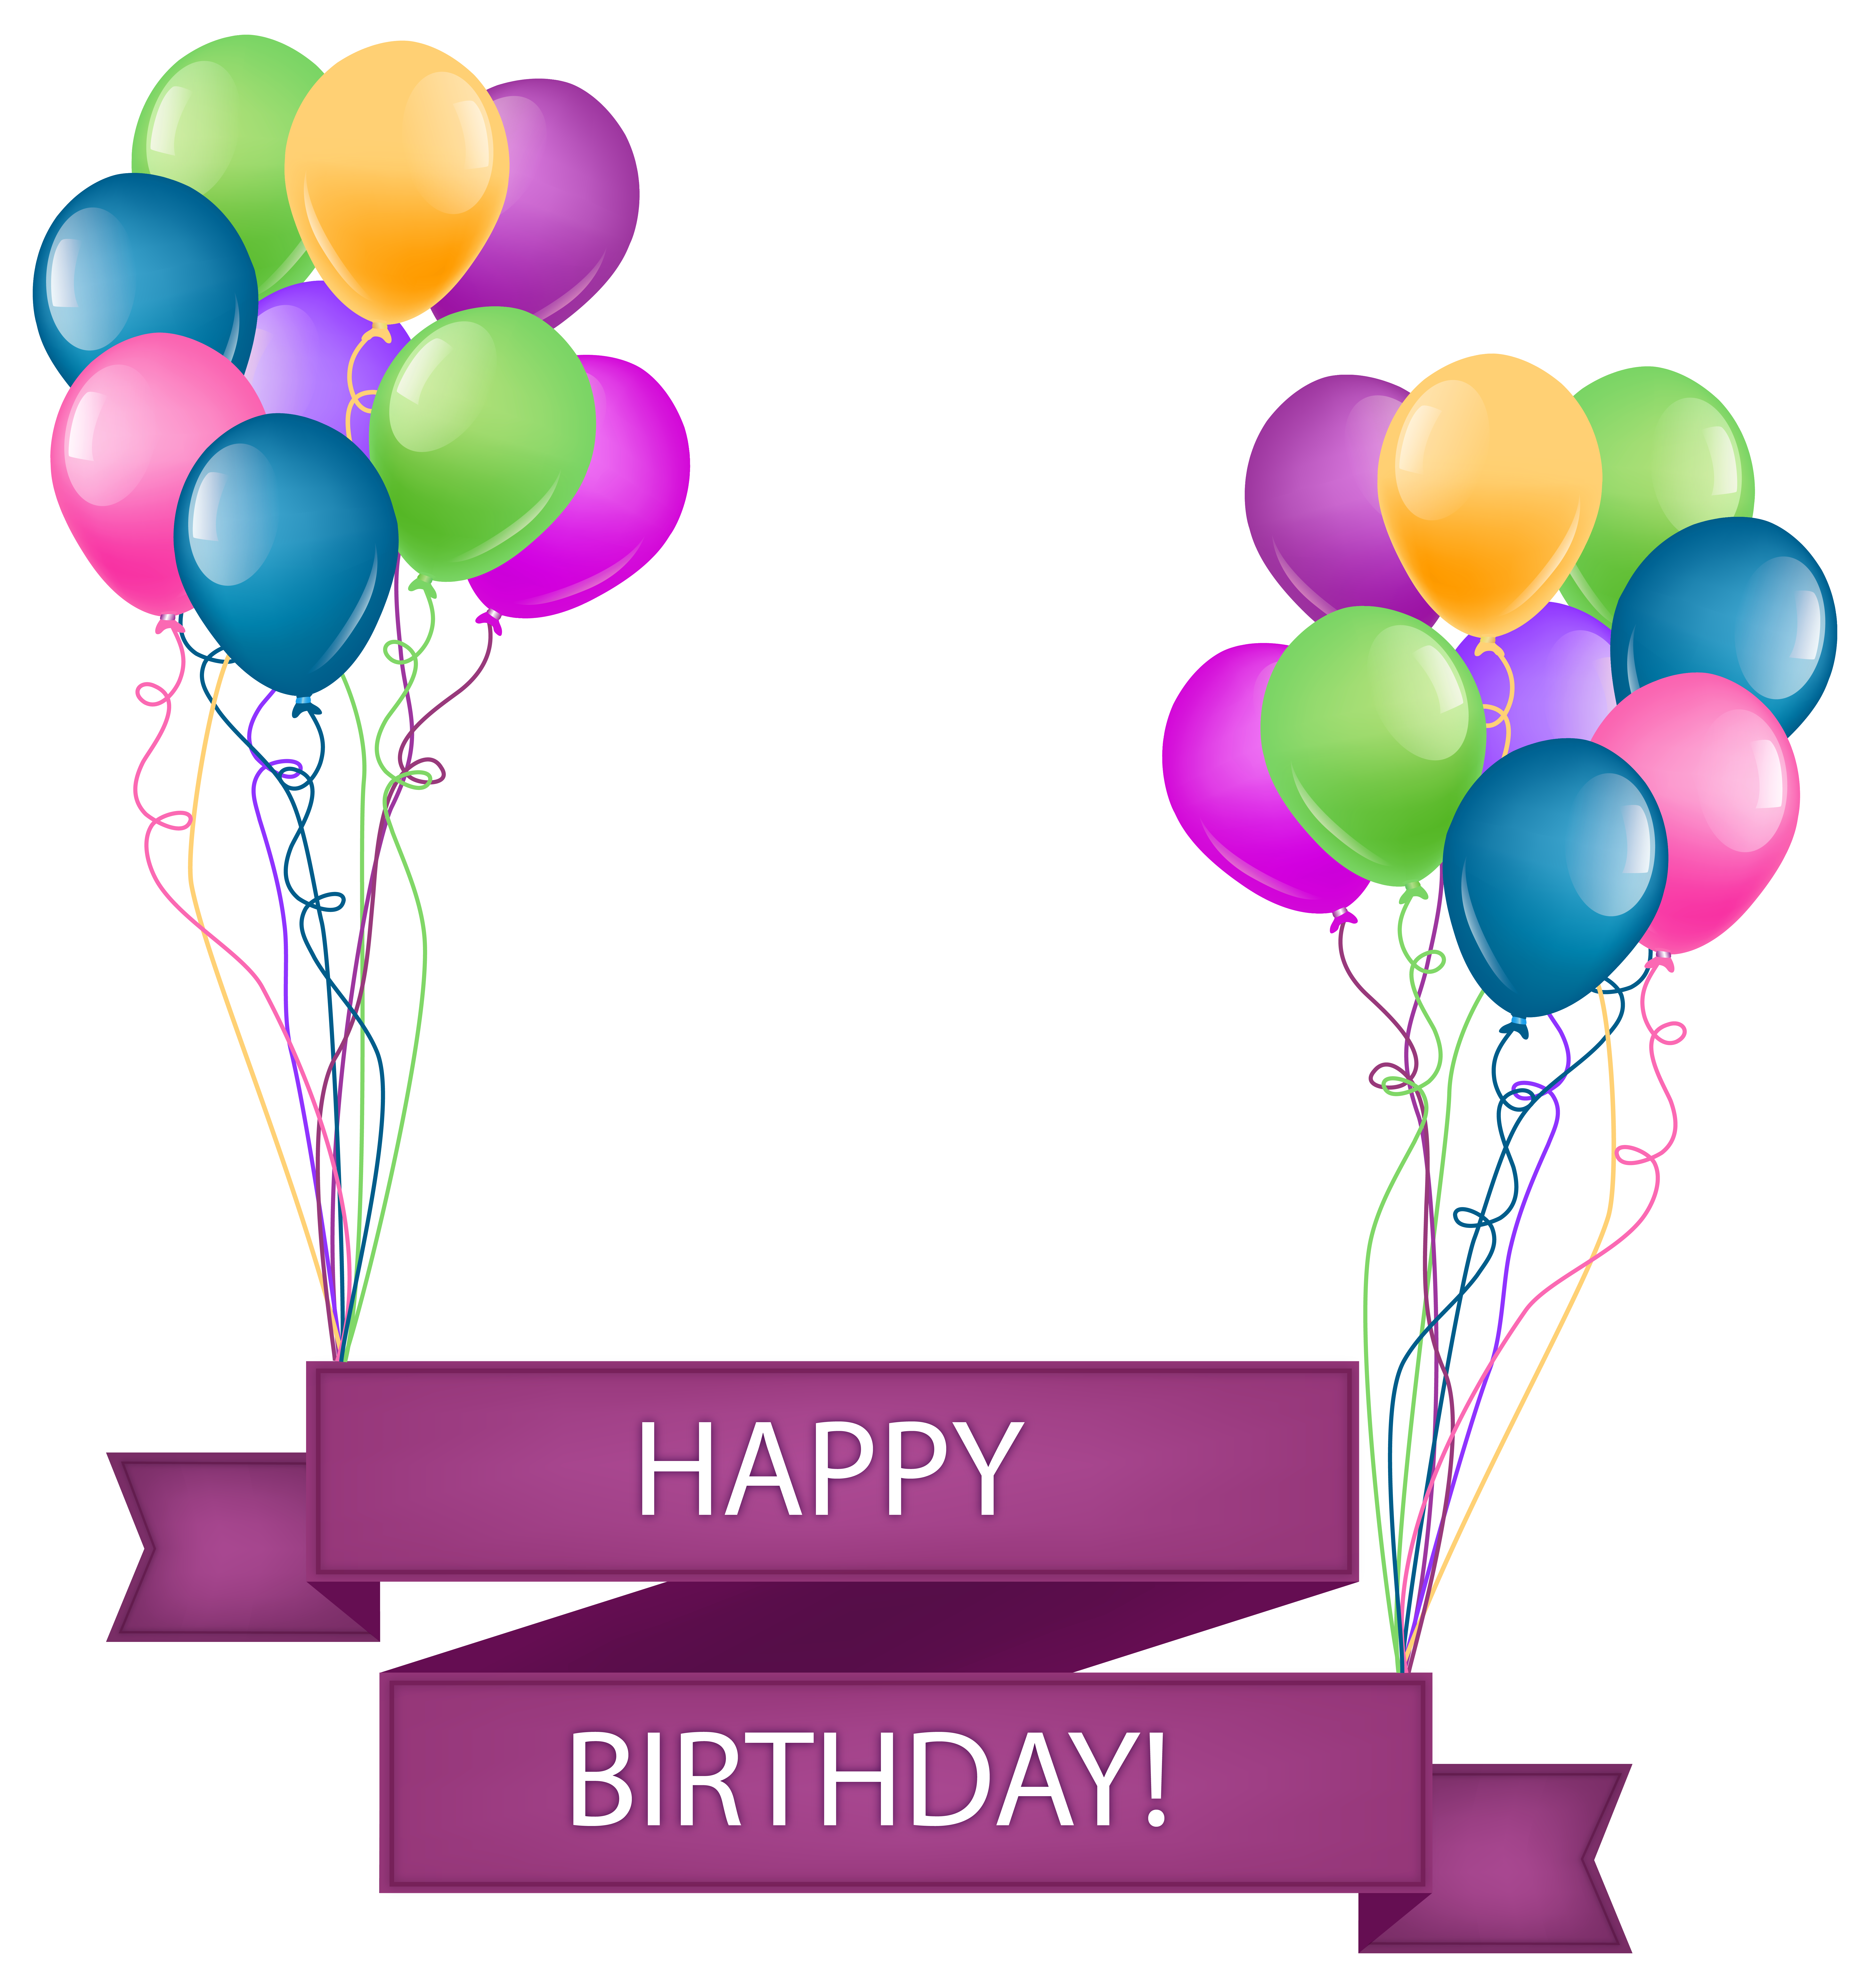 Excited clipart word bubble. Happy birthday banner with